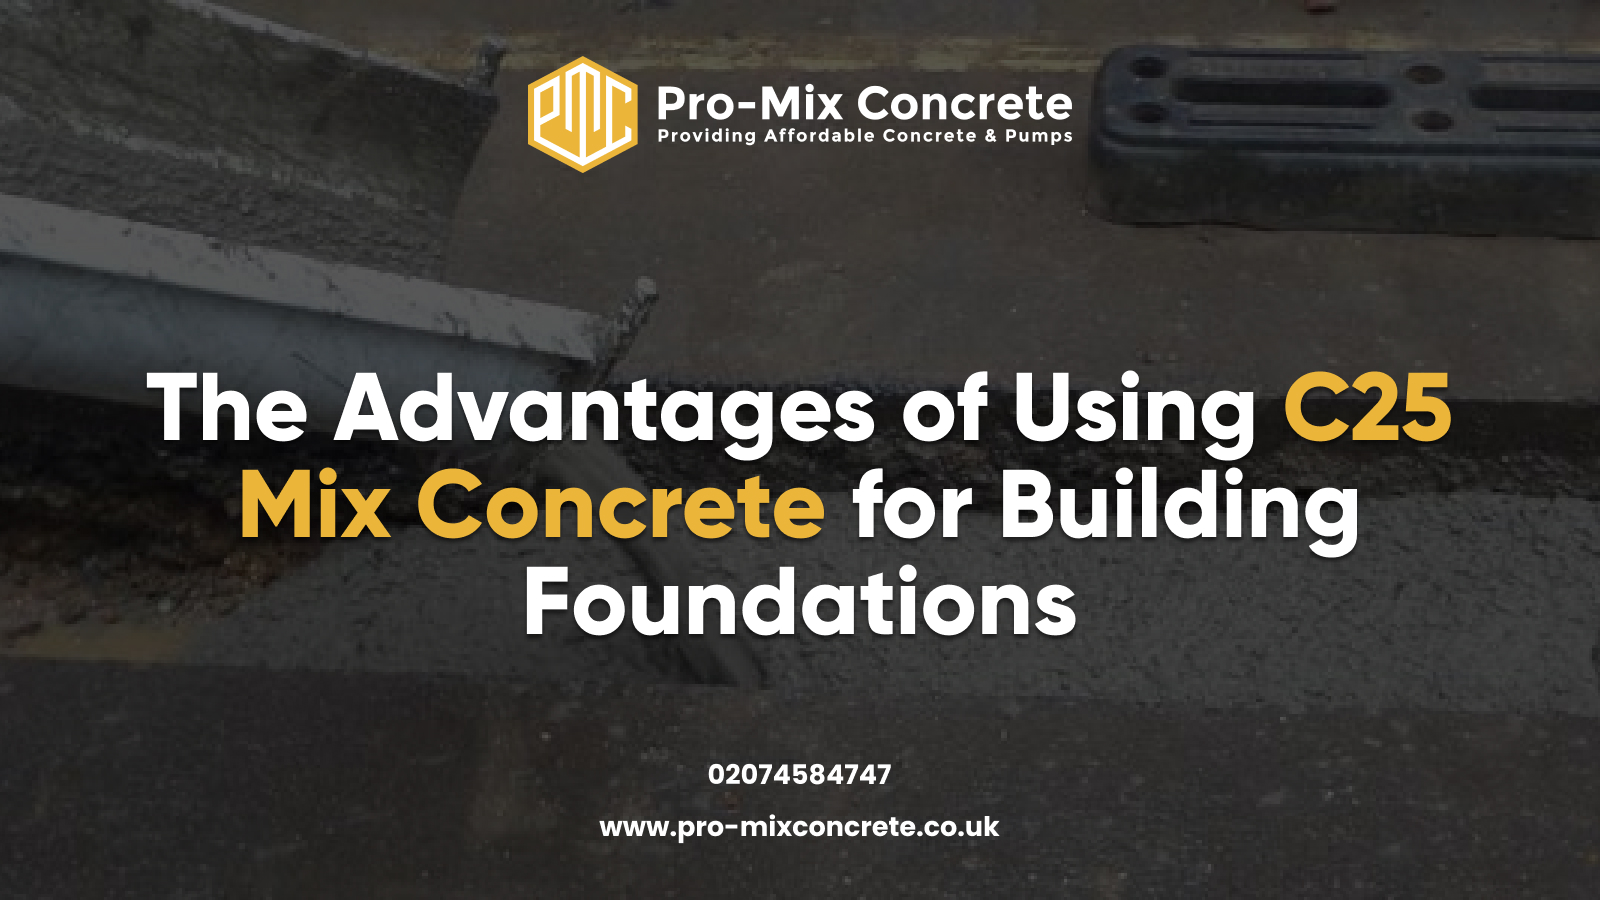 The Advantages of Using C25 Mix Concrete for Building Foundations